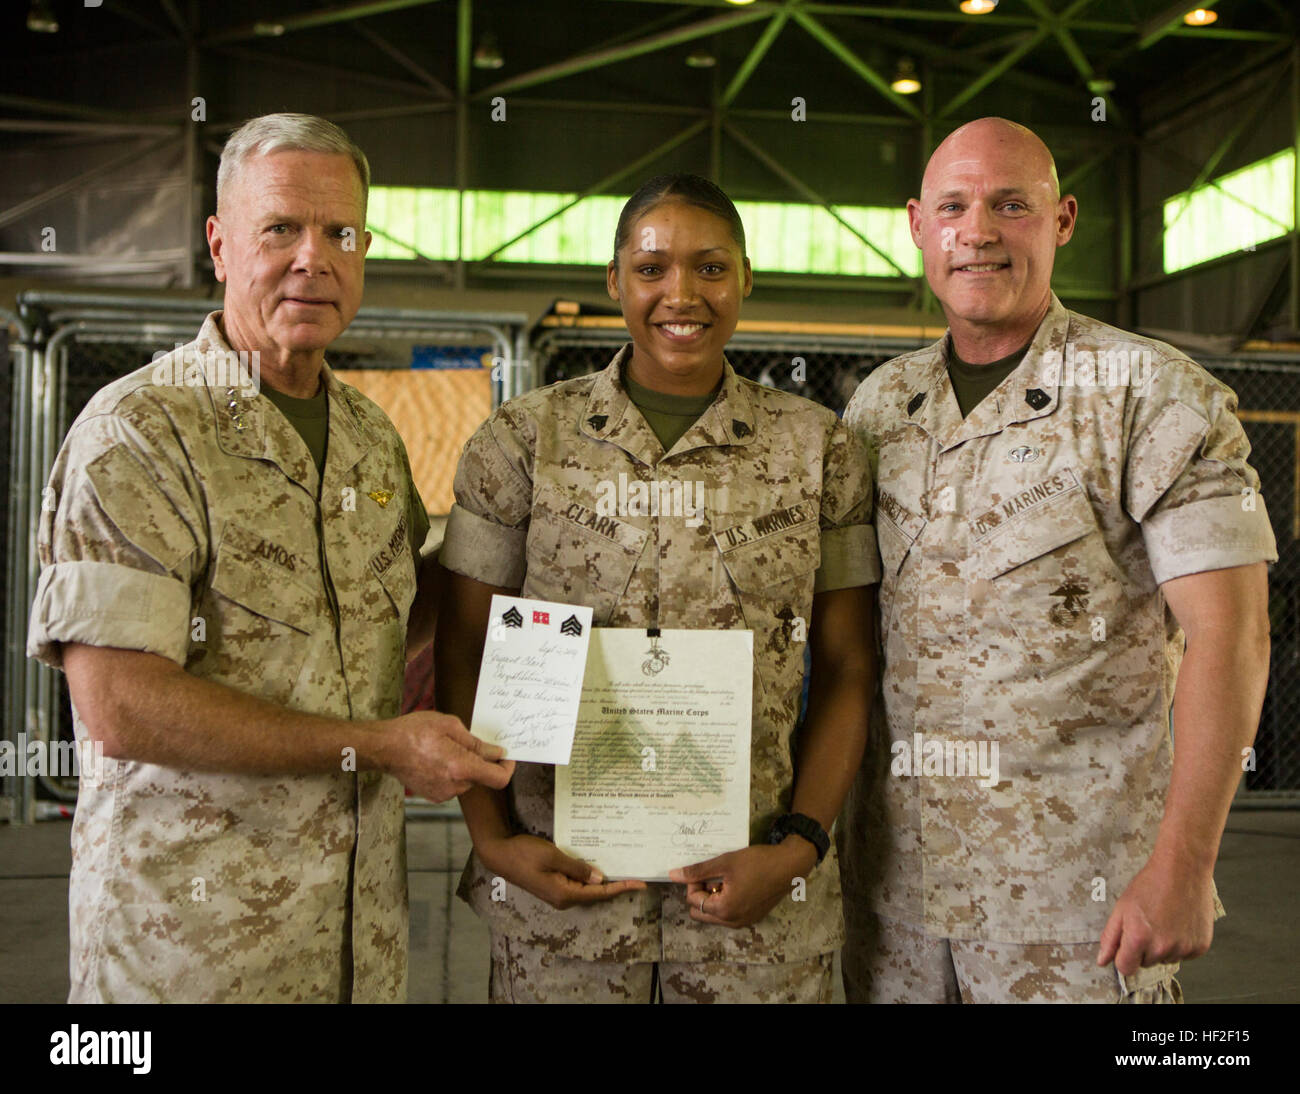 (From left to right) U.S. Marine Corps Gen. James F. Amos, 35th commandant of the Marine Corps, Sgt. Malachijah Clark an avation supply specialist with Special-Purpose Marine Air Ground Task Force Crisis Response (SP-MAGTF Crisis Response), and Sgt.Maj. Micheal P. Barrett, 17th sergeant major of the Marine Corps pose for a photo after promoting Clark from Corporal to Sergeant aboard Morón Air Base, Spain, Sept. 2, 2014. The general and sergeant major spoke to the Marines and Sailors about the significance of SP-MAGTF Crisis Response. SP-MAGTF Crisis Response is a rotational force of Marines an Stock Photo